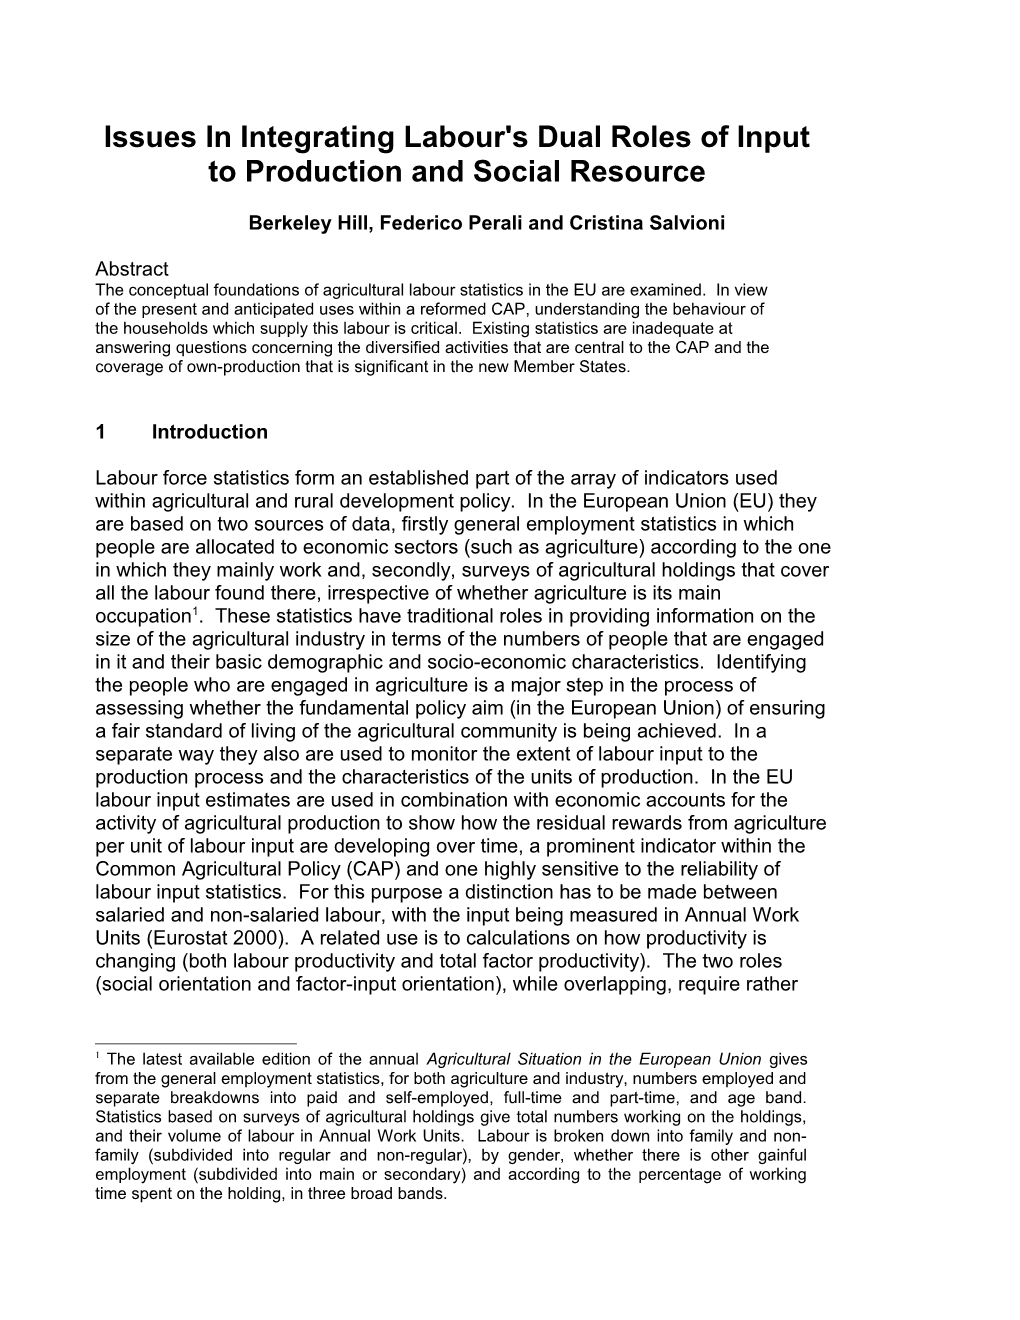 Labour Statistics - Issues in Integrating Labour's Dual Roles of Input to Production And